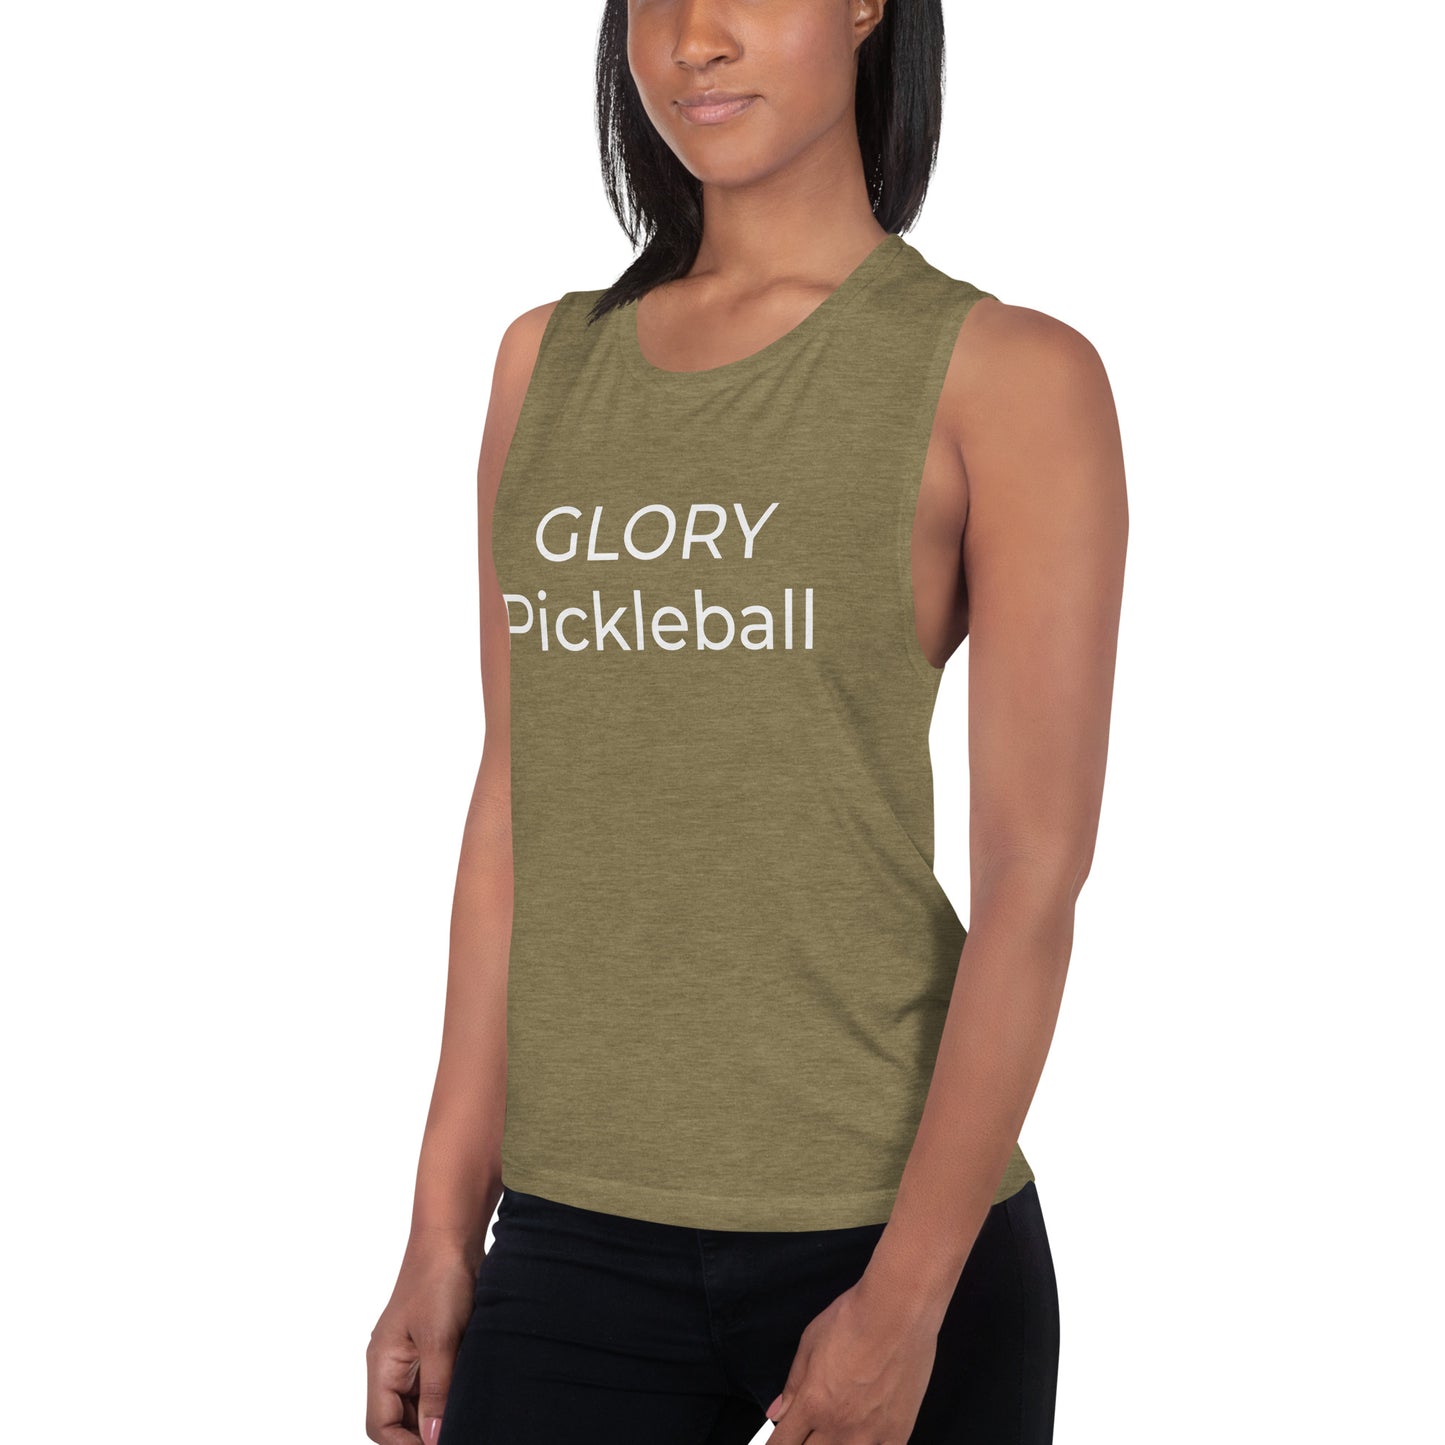 Ladies’ Muscle Tank - Made to order